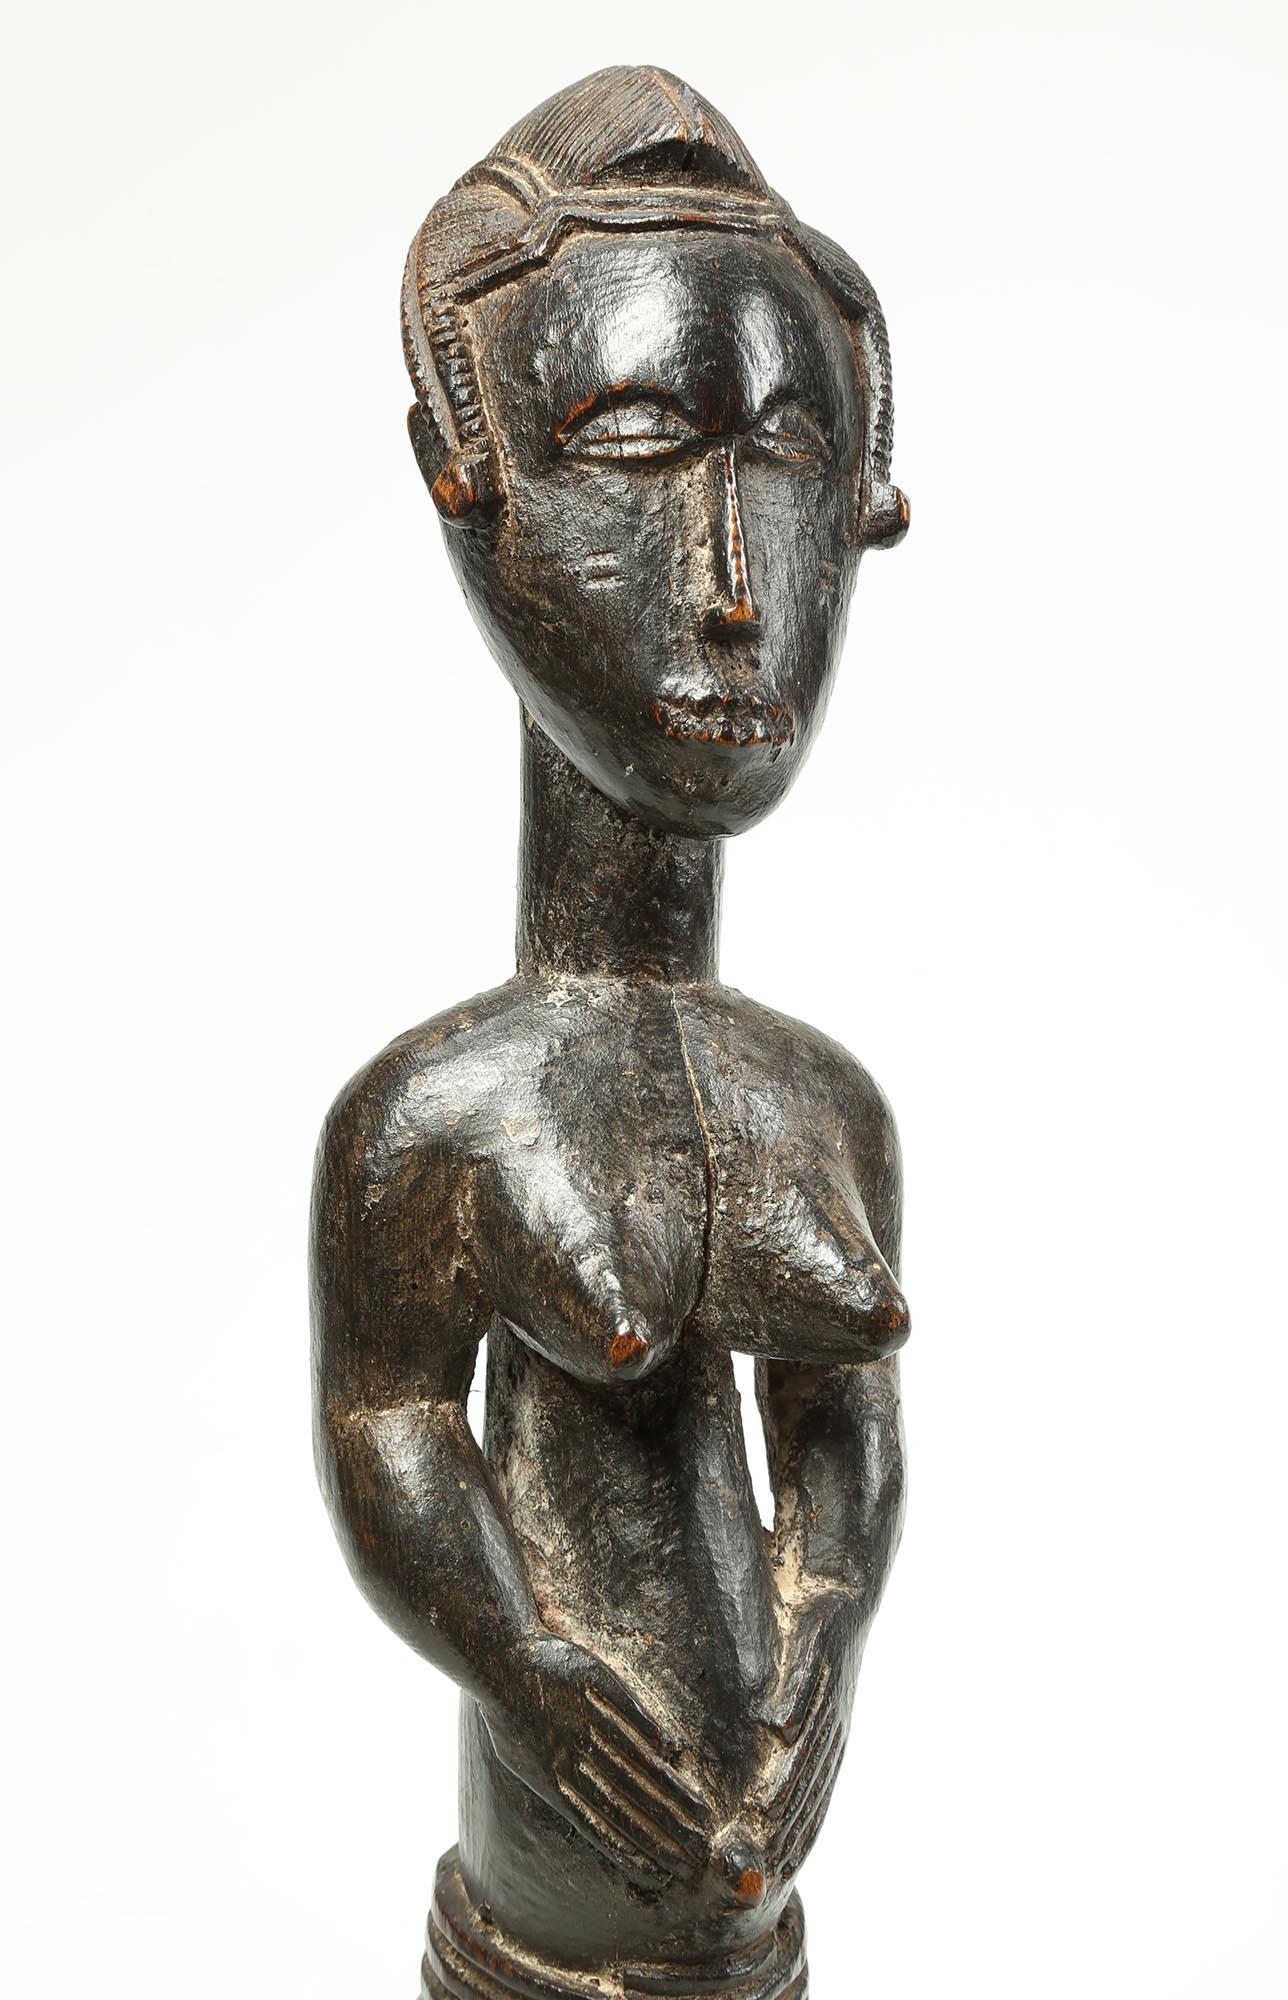 Finely carved female figure, Guro people, Ivory Coast Africa (Cote d'Ivoire), West Africa. Created in the early 20th century. Classic standing female figure with finely carved face and features and delicate hair braids down each side of face. Deep